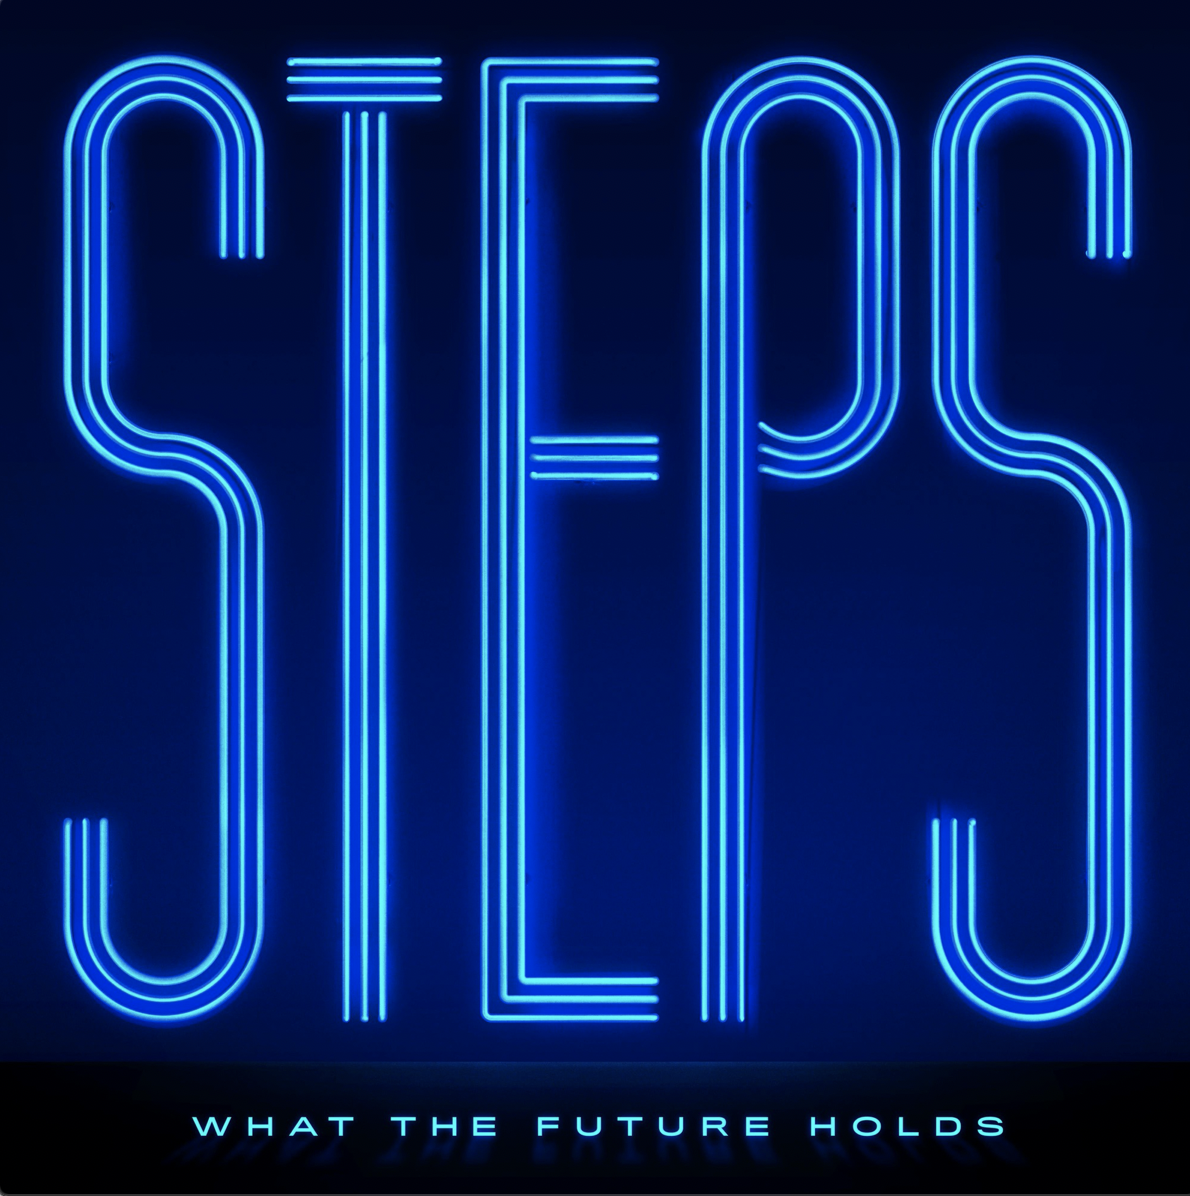 Steps What The Future Holds